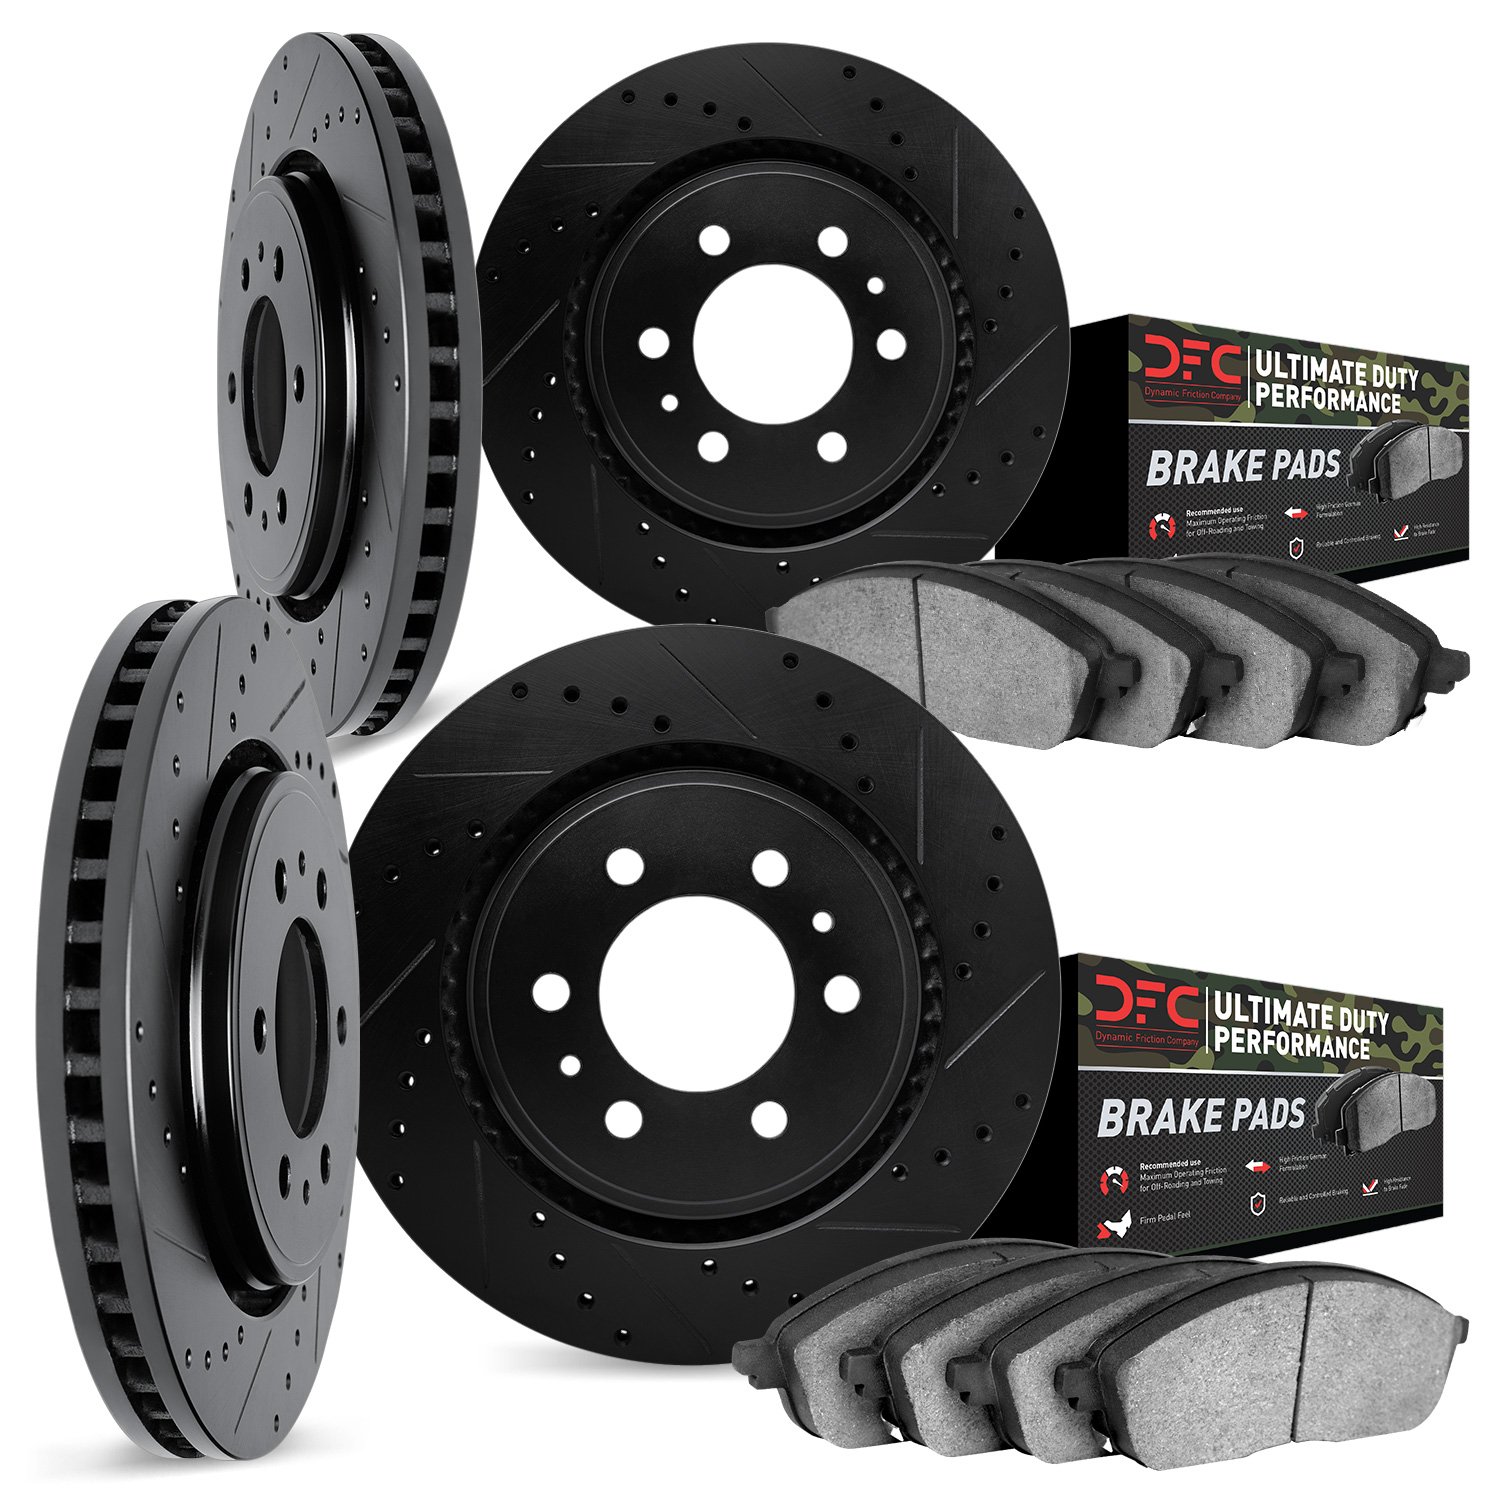 8404-76003 Drilled/Slotted Brake Rotors with Ultimate-Duty Brake Pads Kit [Black], 2003-2009 Lexus/Toyota/Scion, Position: Front